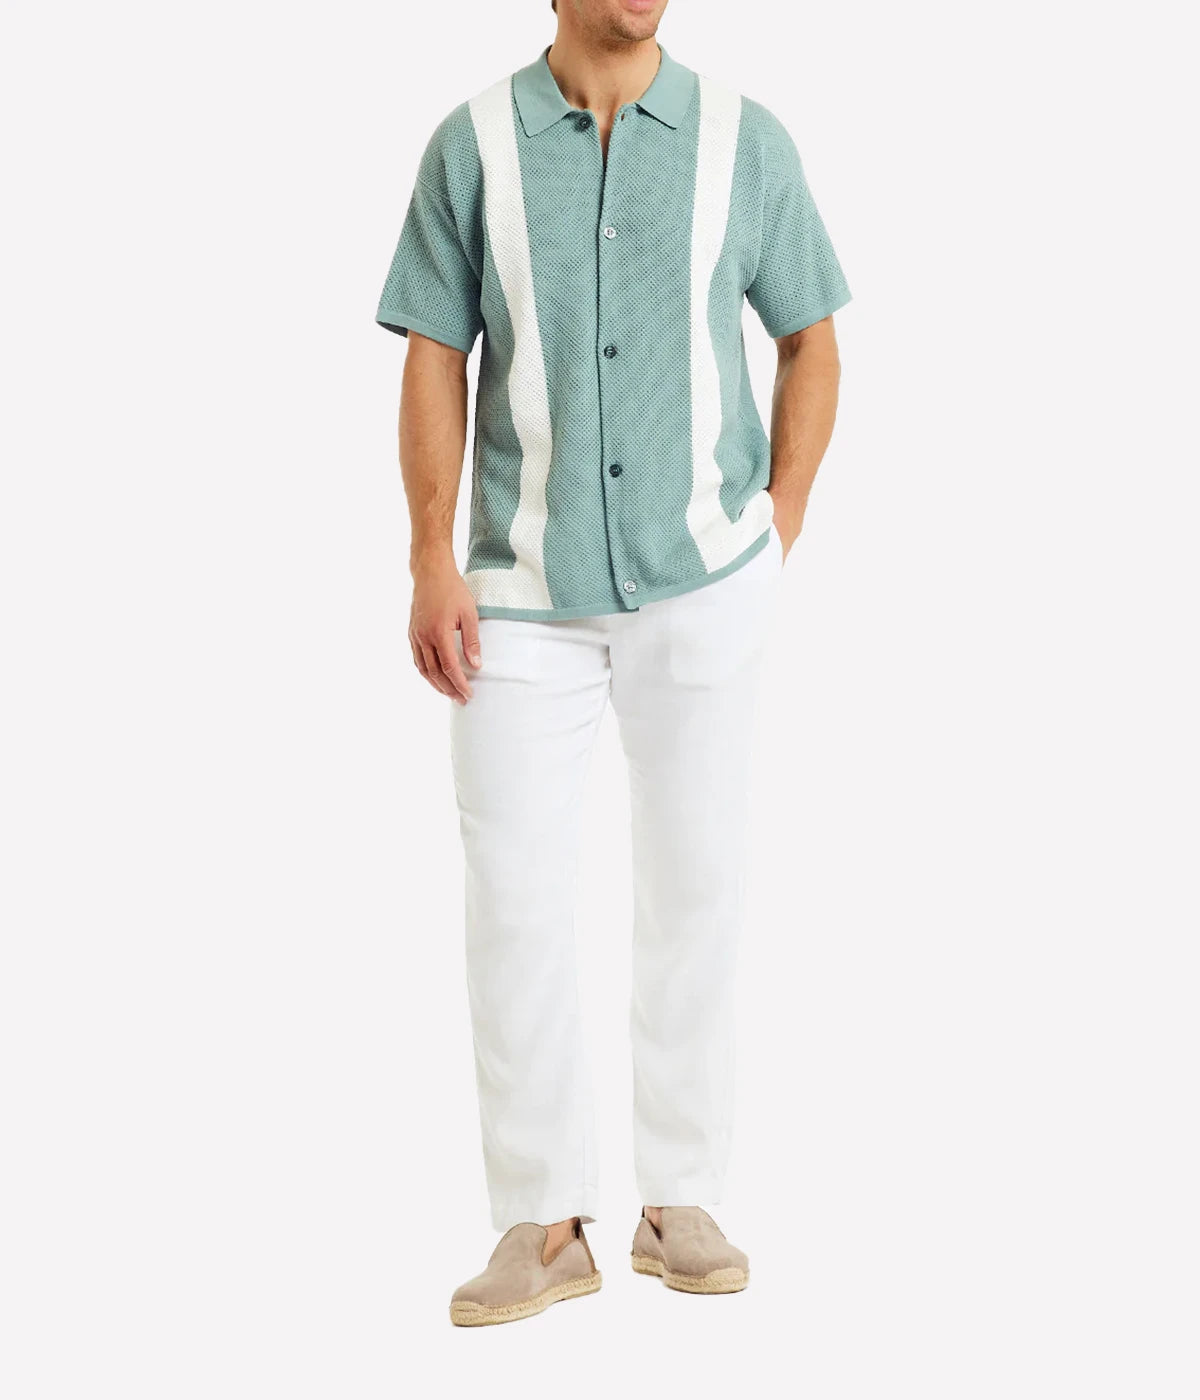 Barretos Short Sleeve Knitted Cardigan in Cloud Blue